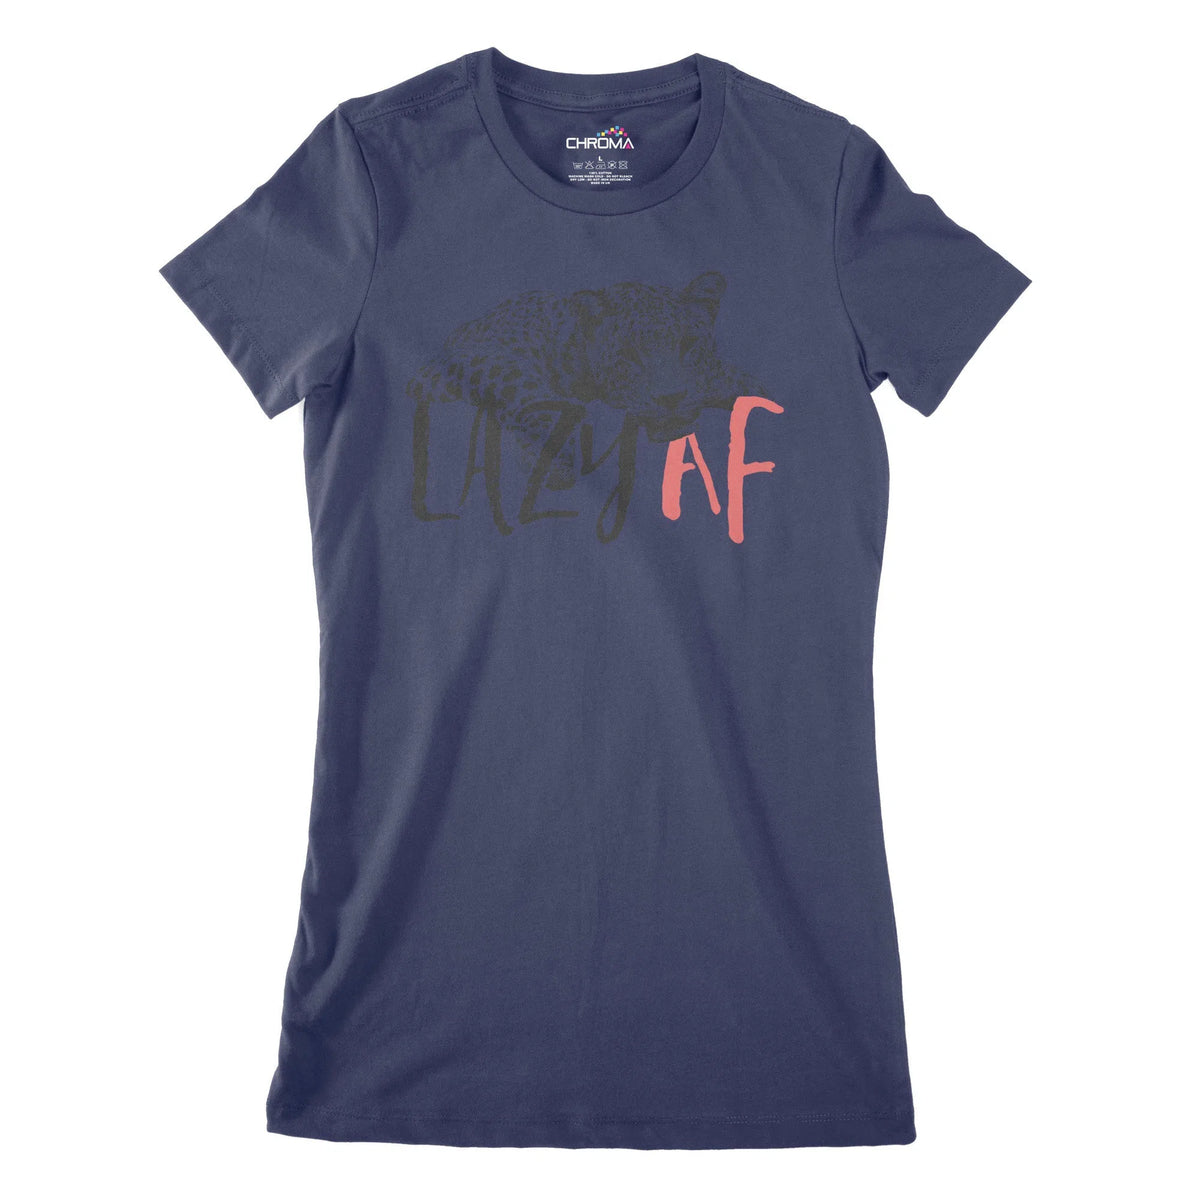 Lazy Af Women's Classic Fitted T-Shirt Chroma Clothing